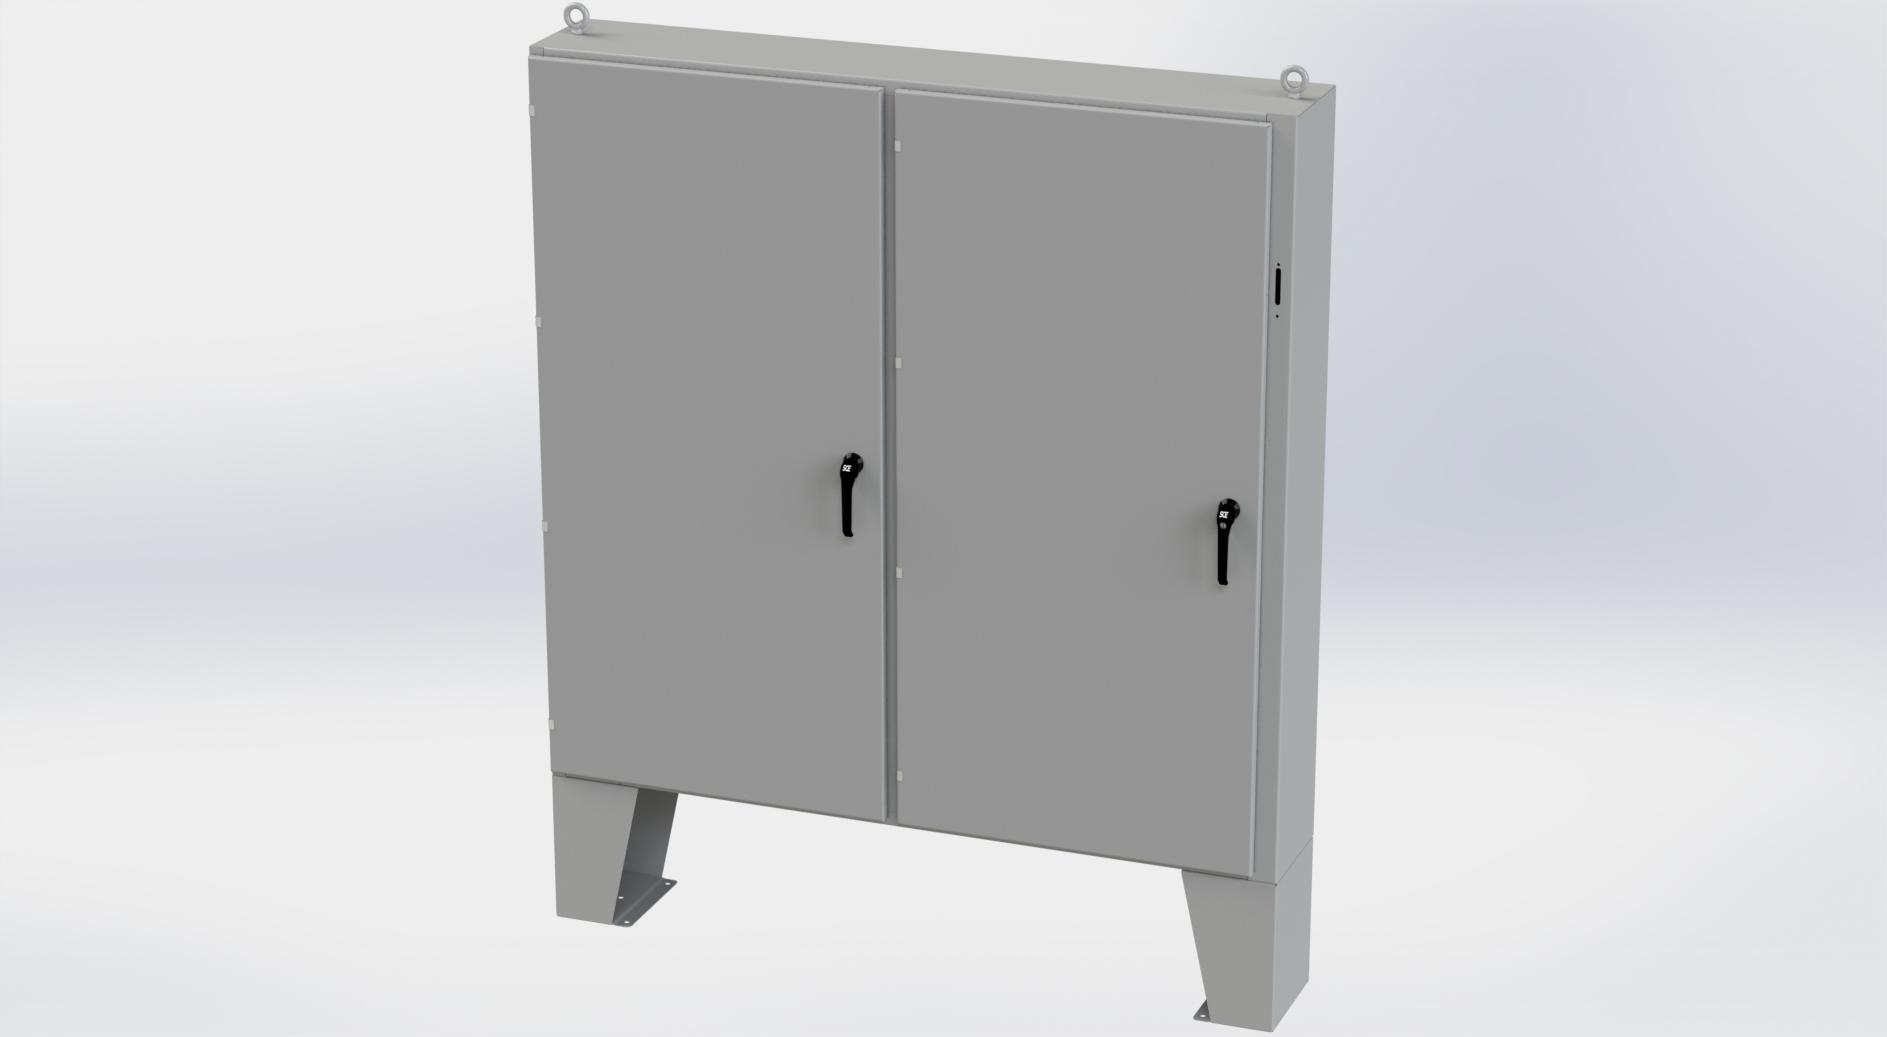 Saginaw Control SCE-72X7312LP 2DR X LP Enclosure, Height:72.00", Width:73.00", Depth:12.00", ANSI-61 gray powder coating inside and out. Optional sub-panels are powder coated white.